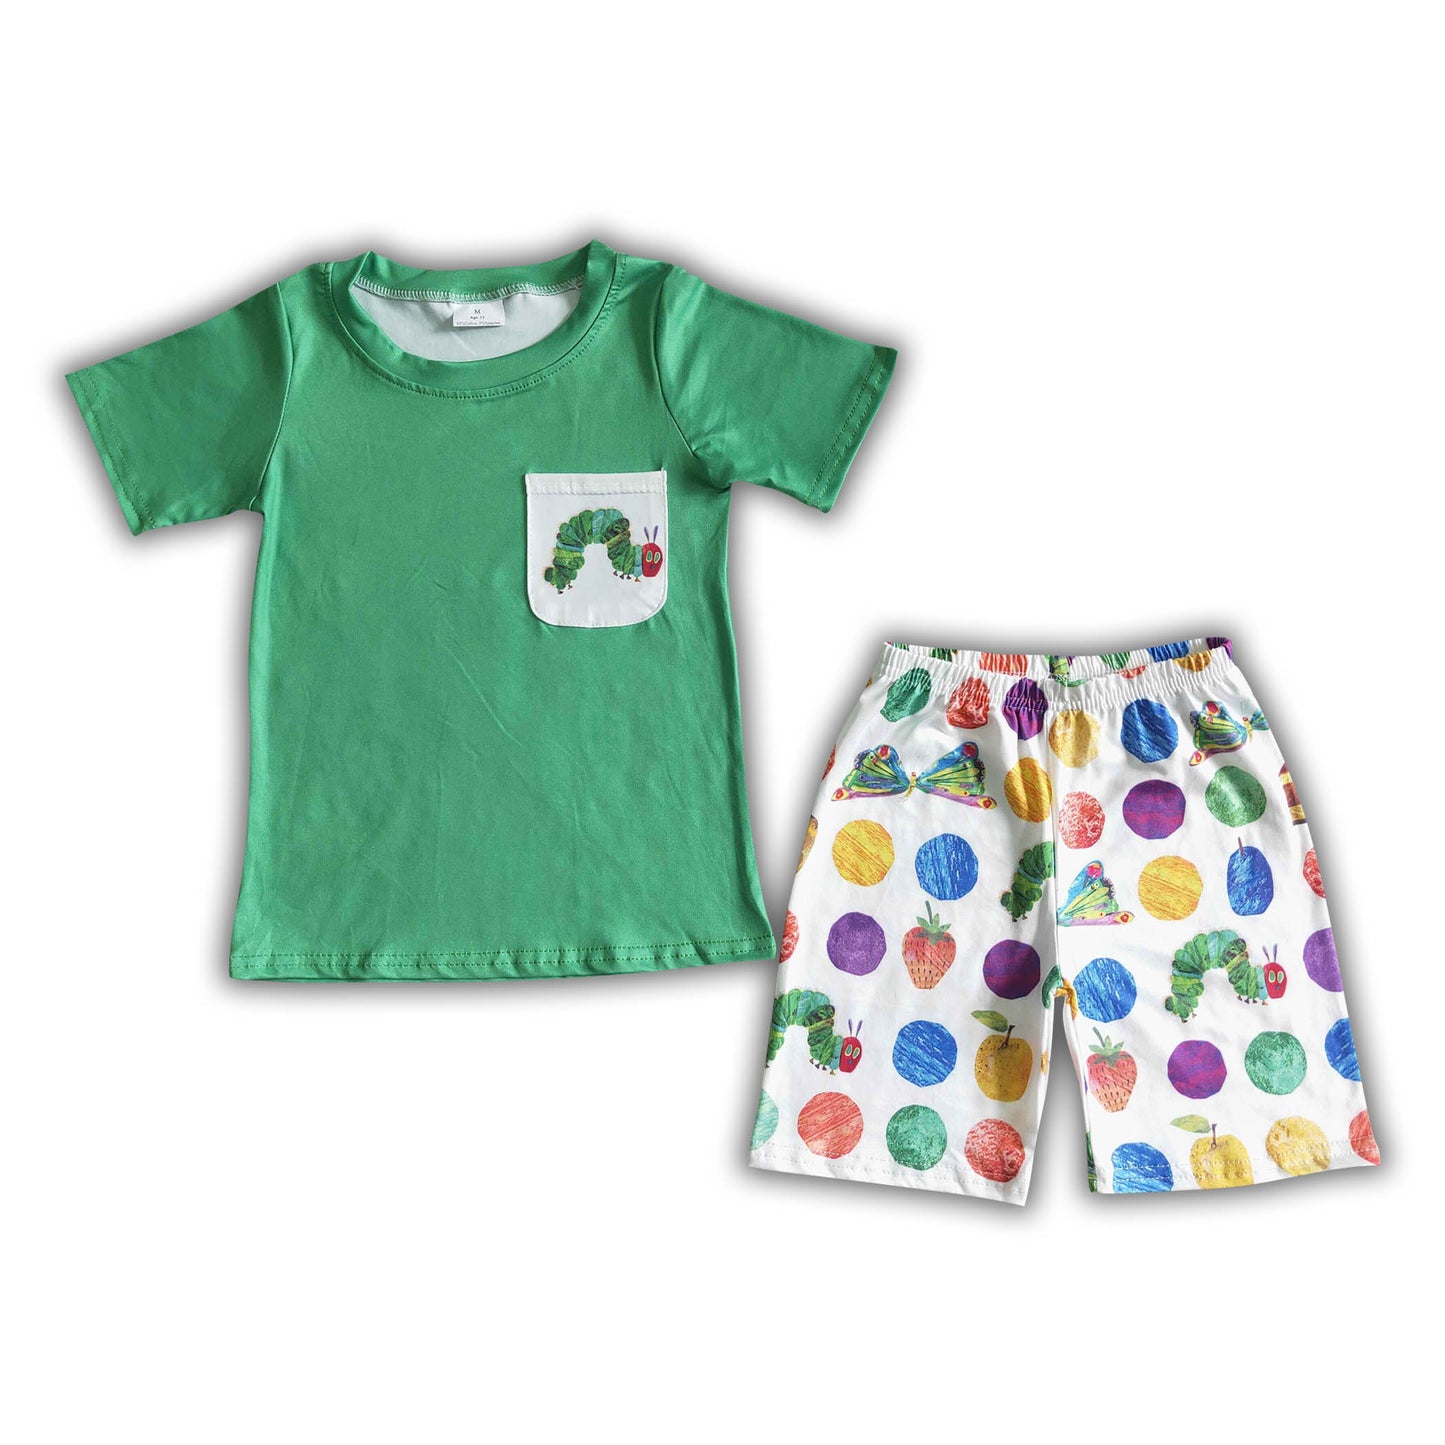 Green worm pocket baby boy summer outfits